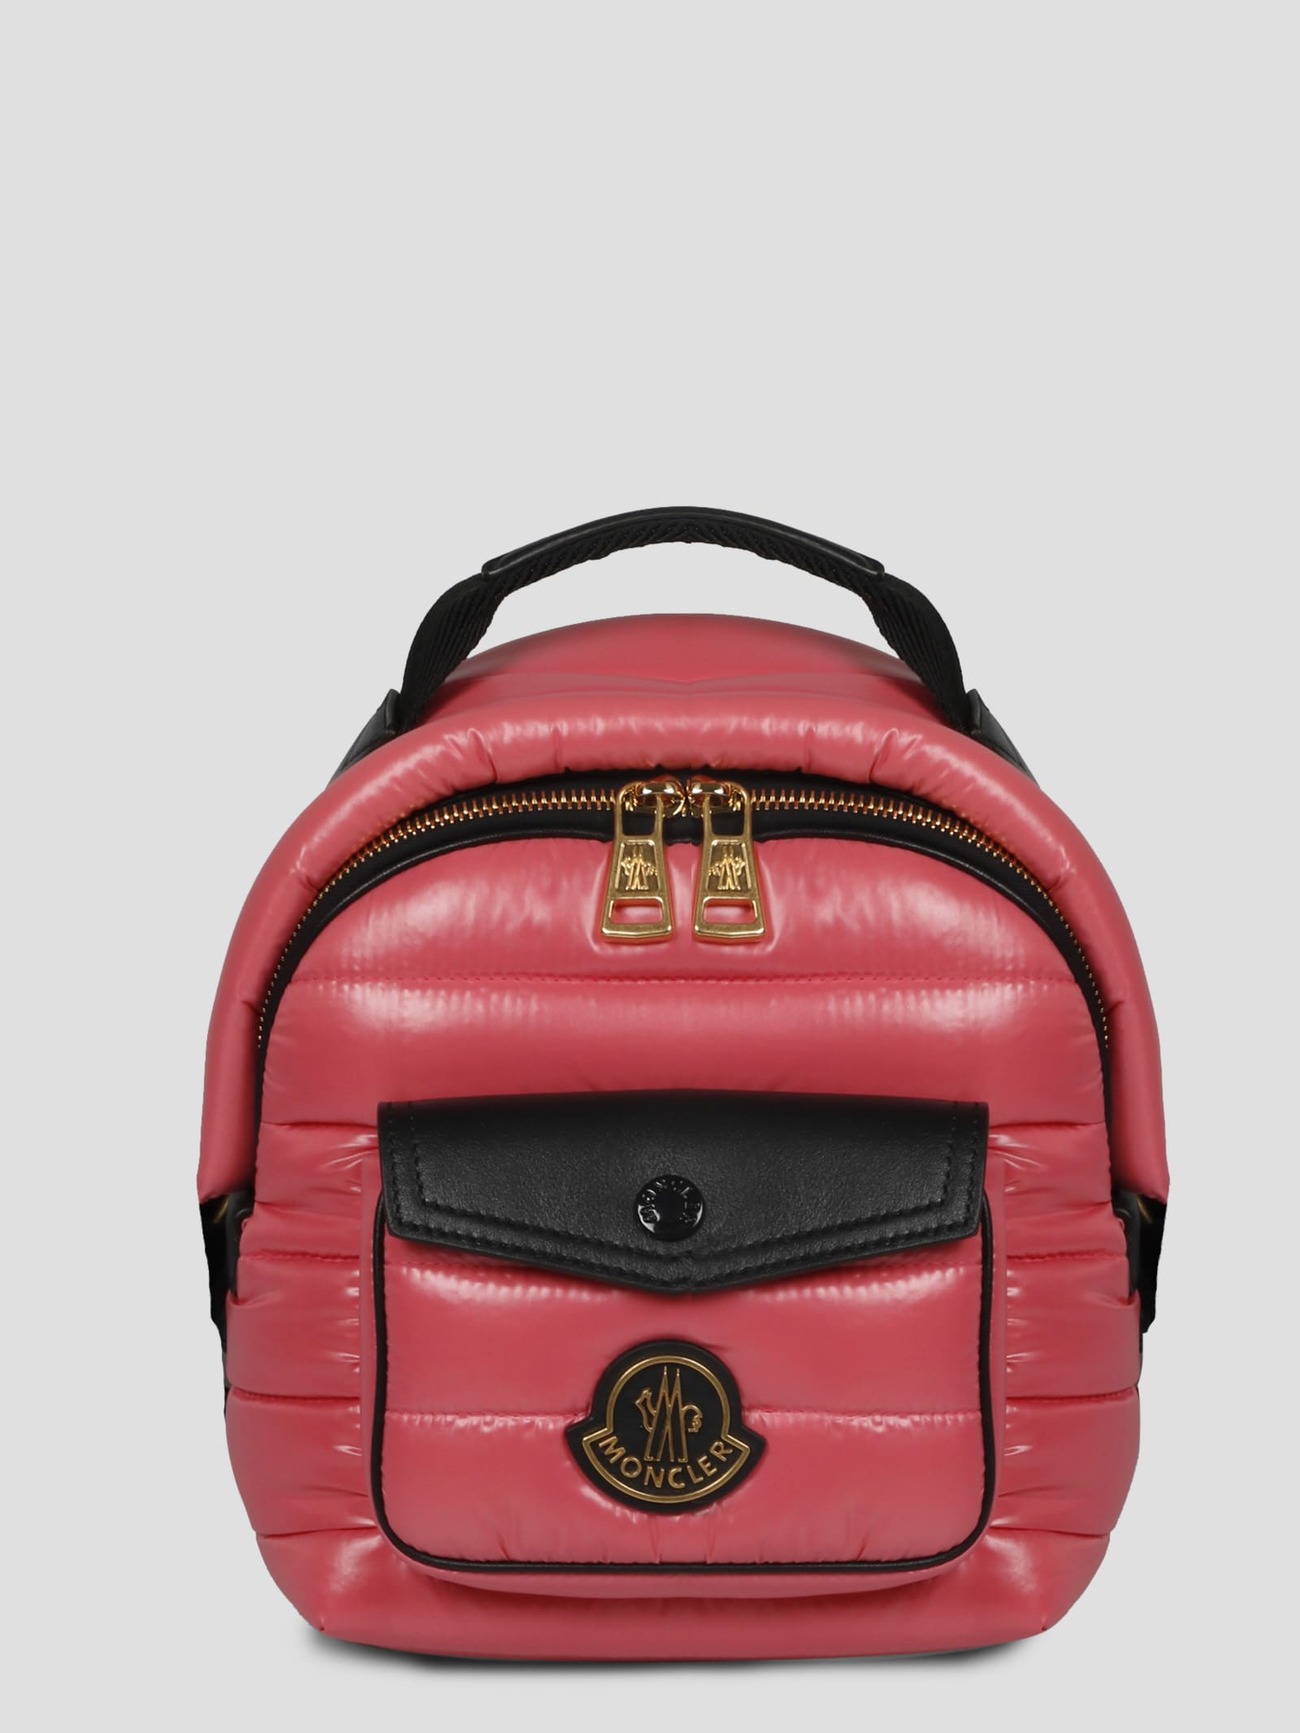 Moncler Mini Astro Backpack in pink / purple